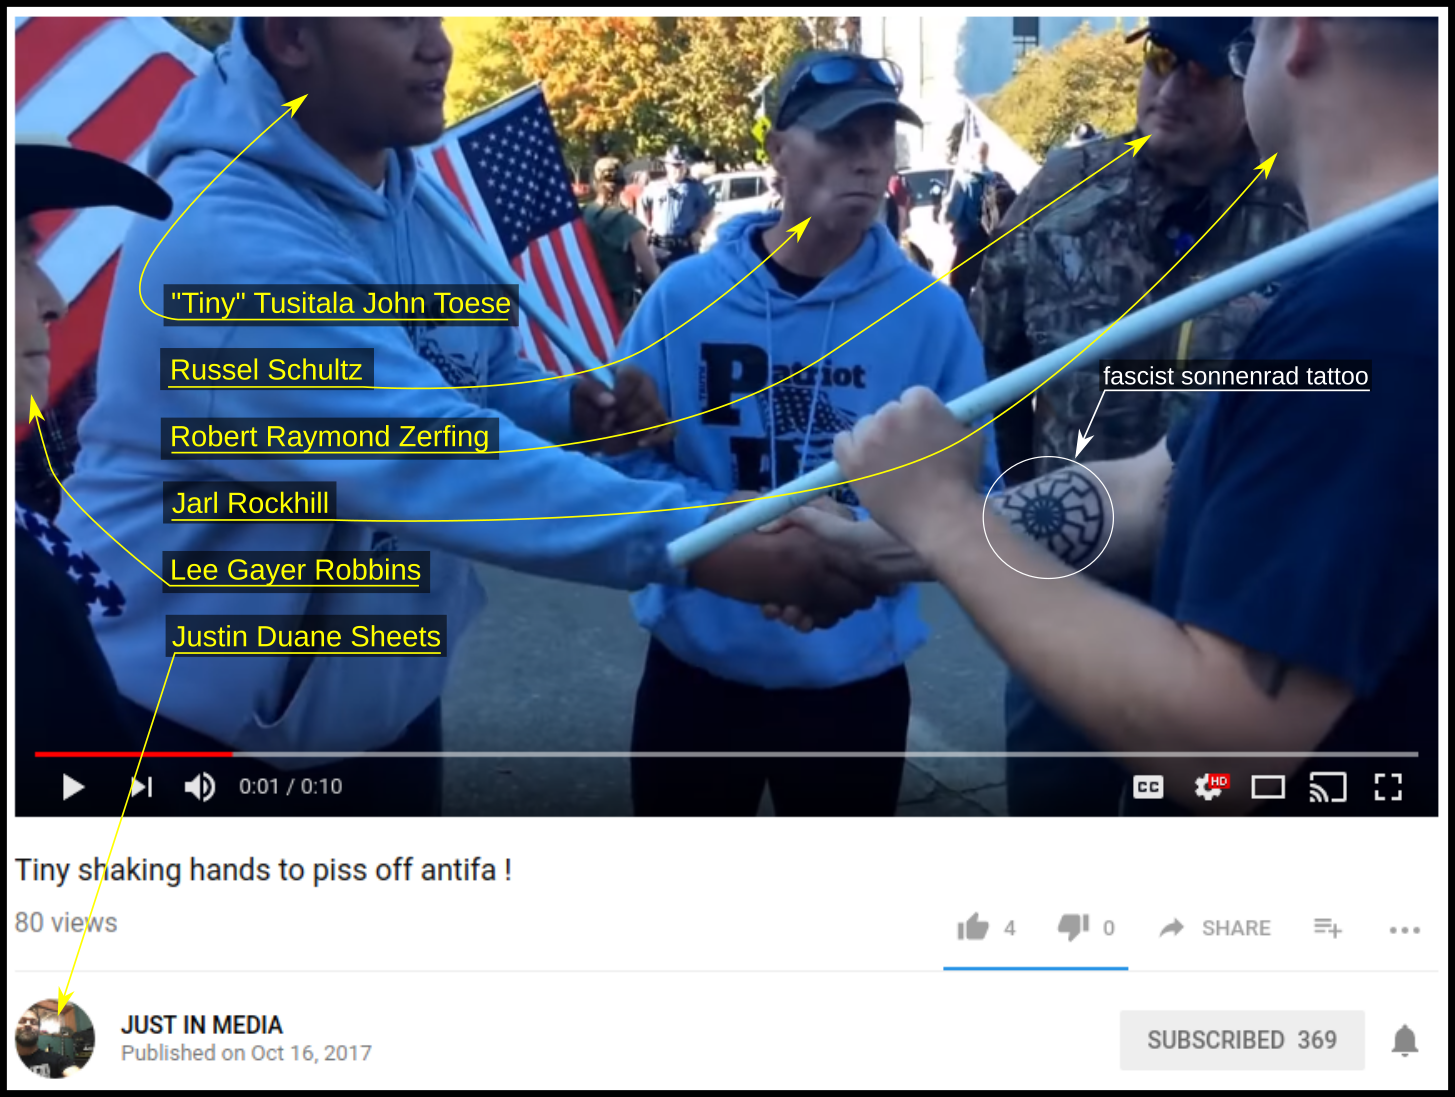 Justin Sheets films Tiny Toese shaking hands with neo-nazi Jarl Rockhill.